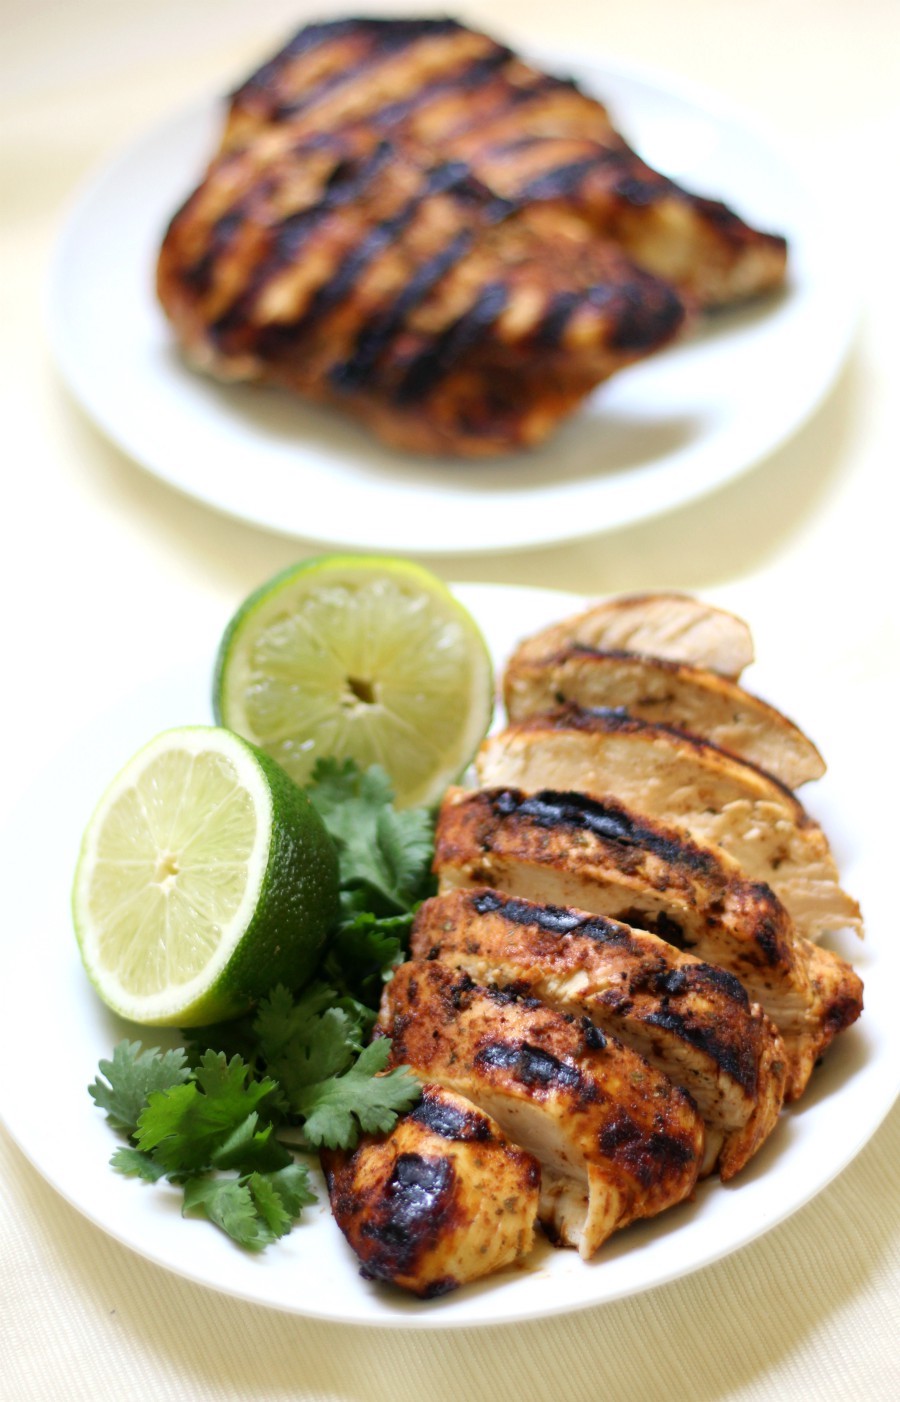 Grilled Chili Lime Chicken ( Gluten-Free, Paleo, Allergy-Free) | Strength and Sunshine @RebeccaGF666 You'll want this spicy and zesty recipe on the grill asap! Grilled Chili Lime Chicken that's a delicious healthy entree for your next bqq or cookout! It's gluten-free, paleo, and allergy-free; perfect for pleasing the crowd and awakening the taste buds! #grilledchicken #chililime #chicken #glutenfree #paleo #chililimechicken #strengthandsunshine